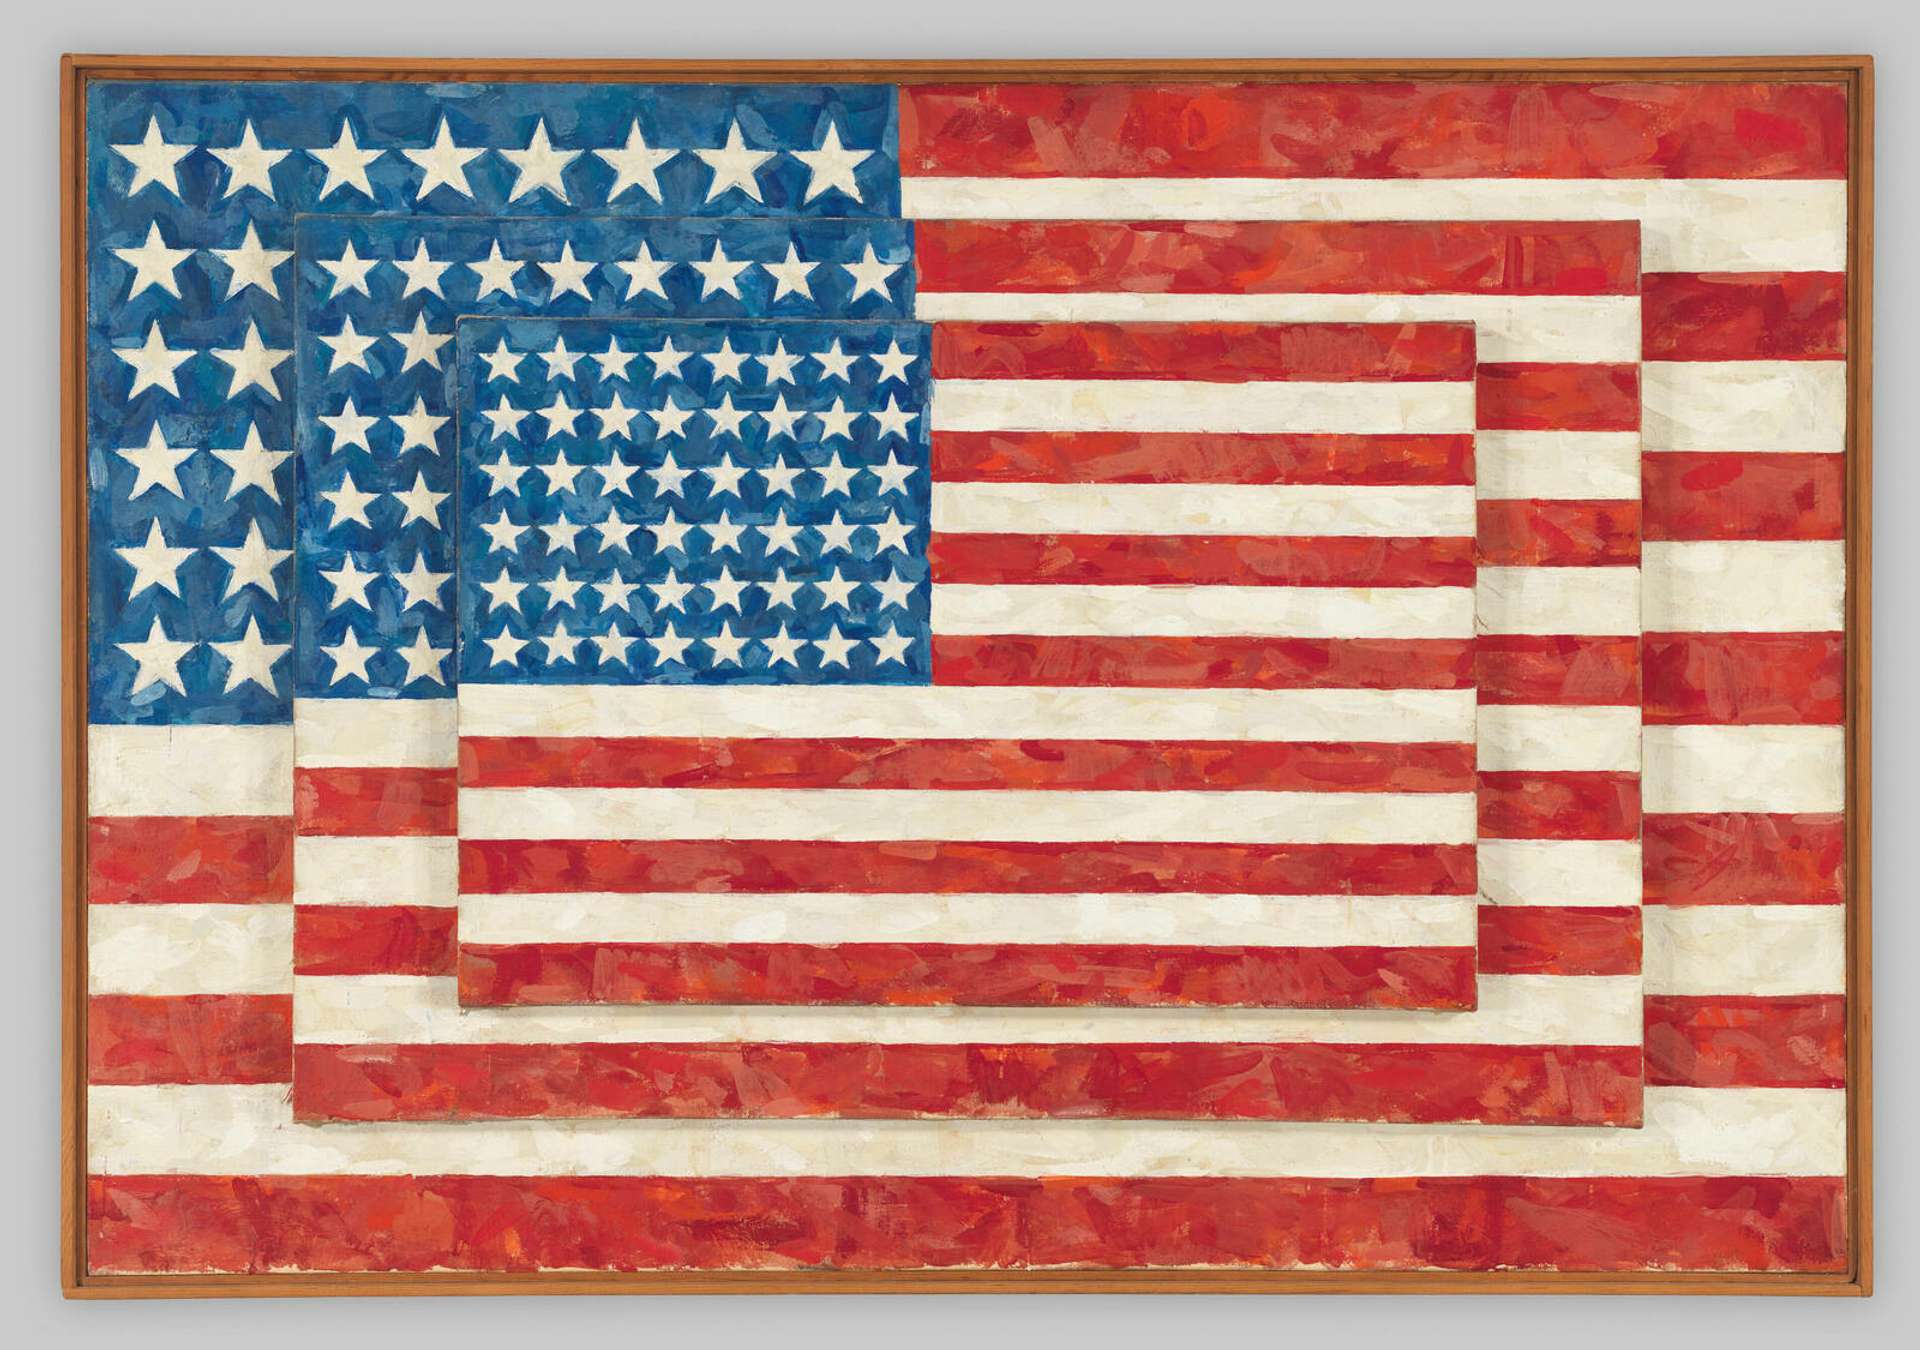 A painting of three American flags layered on top of one another.